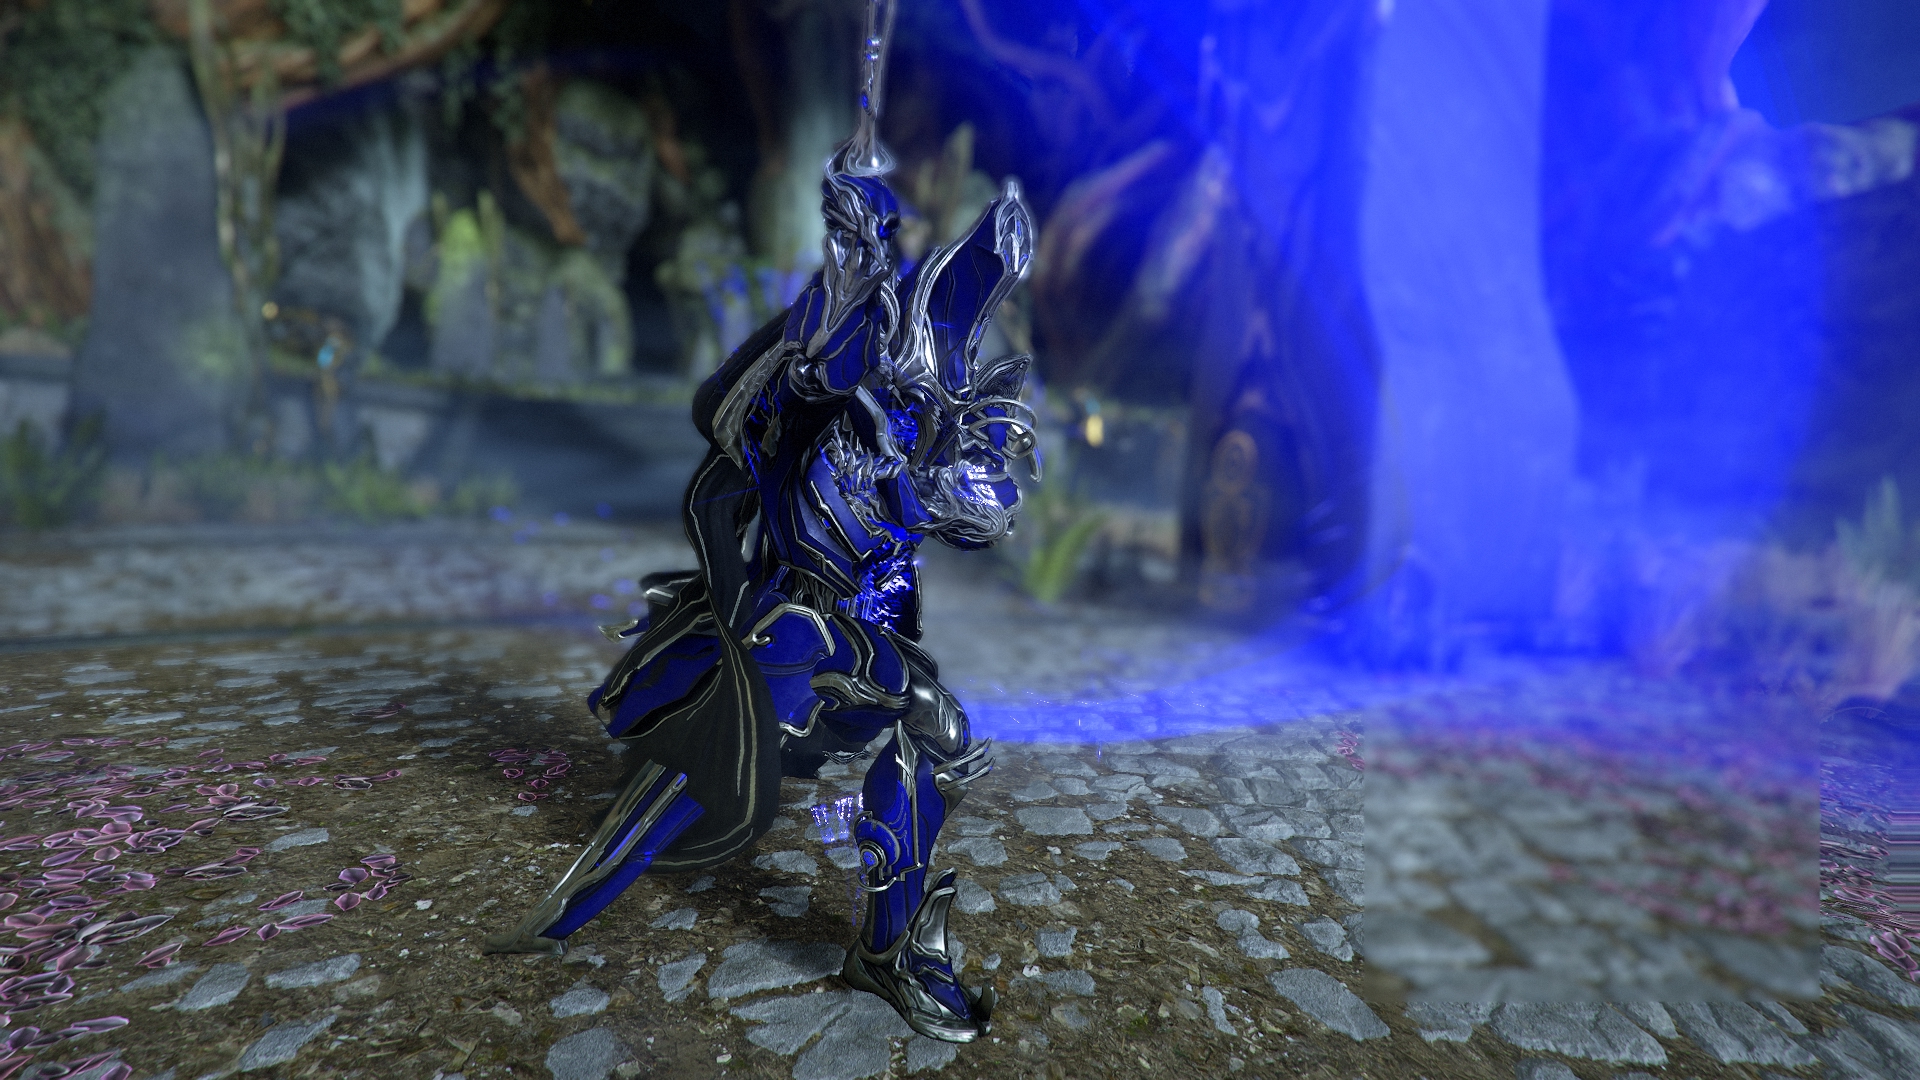 A digital HD wallpaper featuring the Warframe video game character wielding the Nikana weapon, creating a striking and vibrant desktop background.